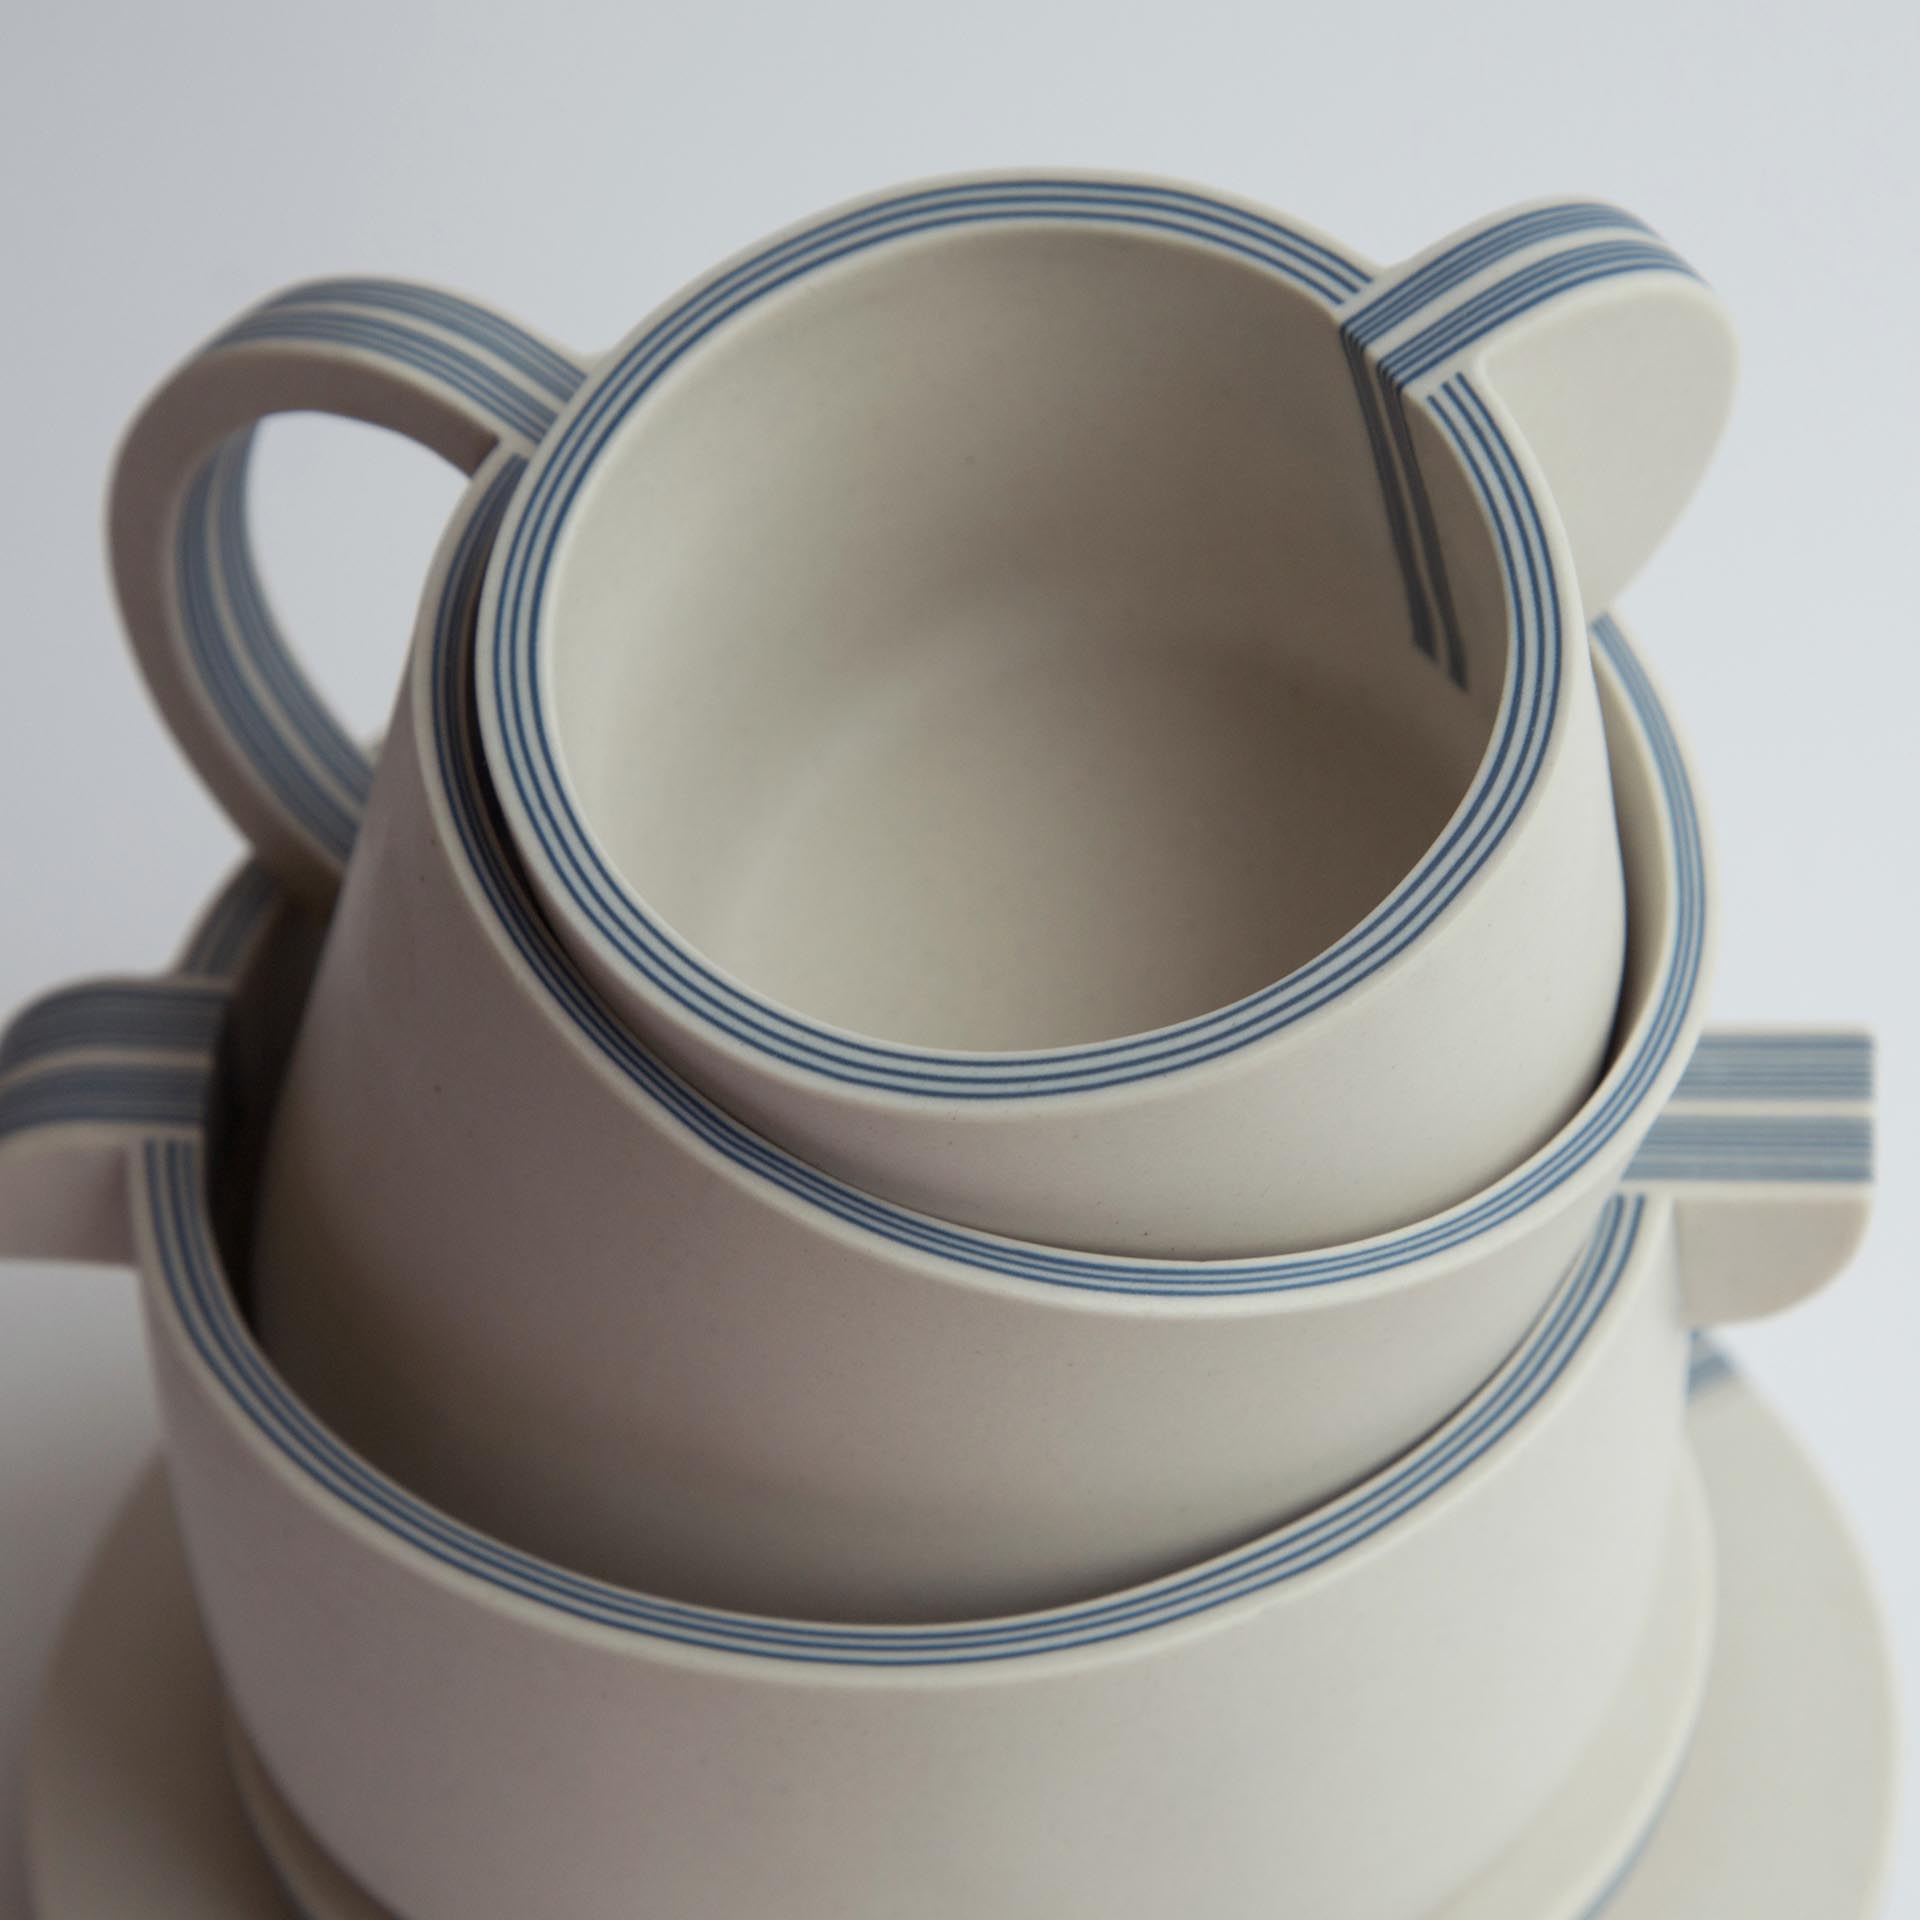 Plycelain Tableware Collection by Yuting Chang